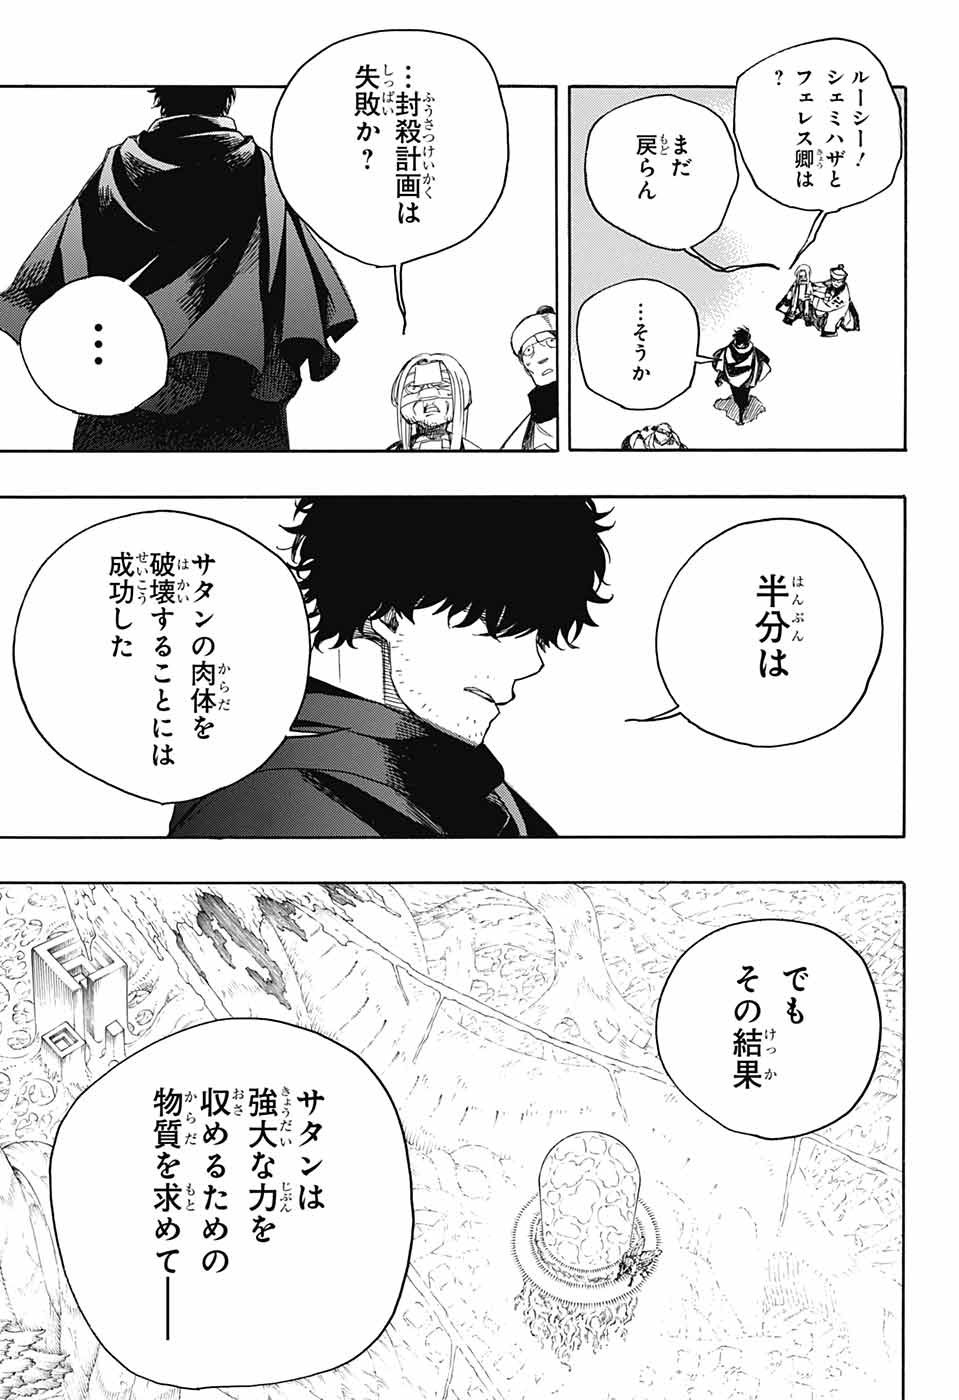 Ao no Exorcist - Chapter 138 - Page 33